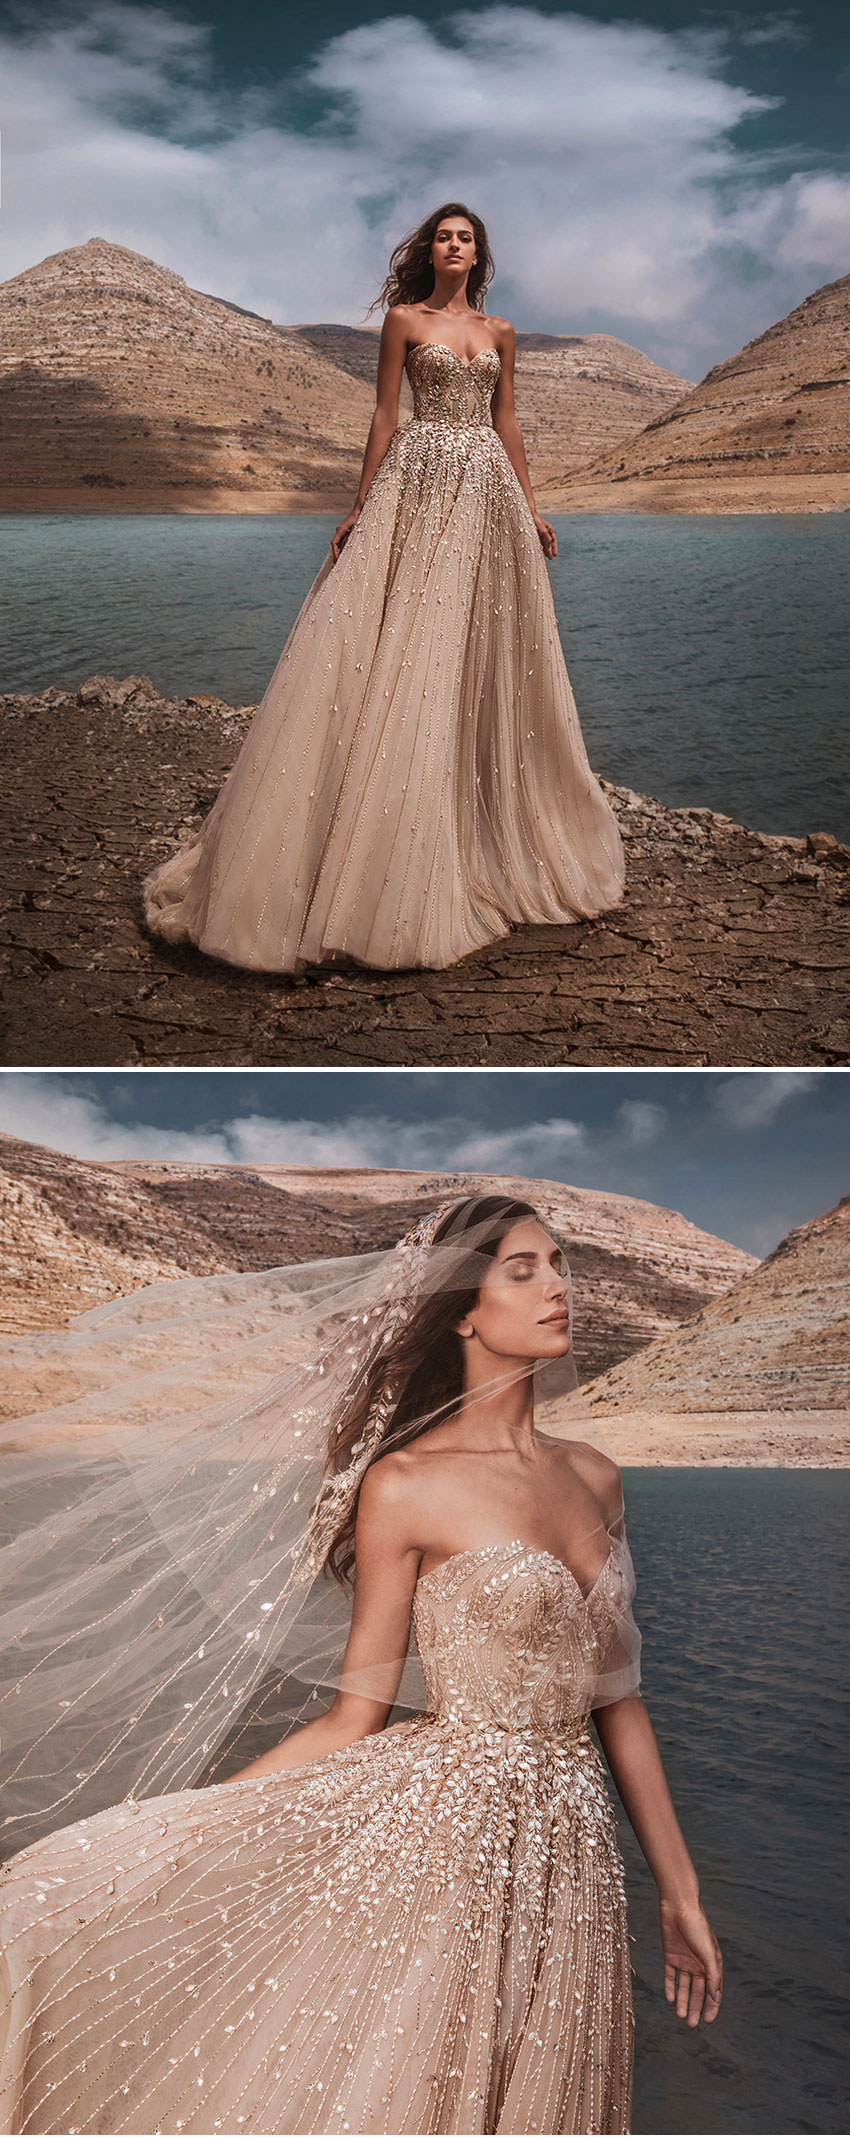 Zuhair Murad Fall 2021 Bridal collection is designed in shades of of-white, sandy and pinkish pastel shades featured in Perfect Wedding magazine